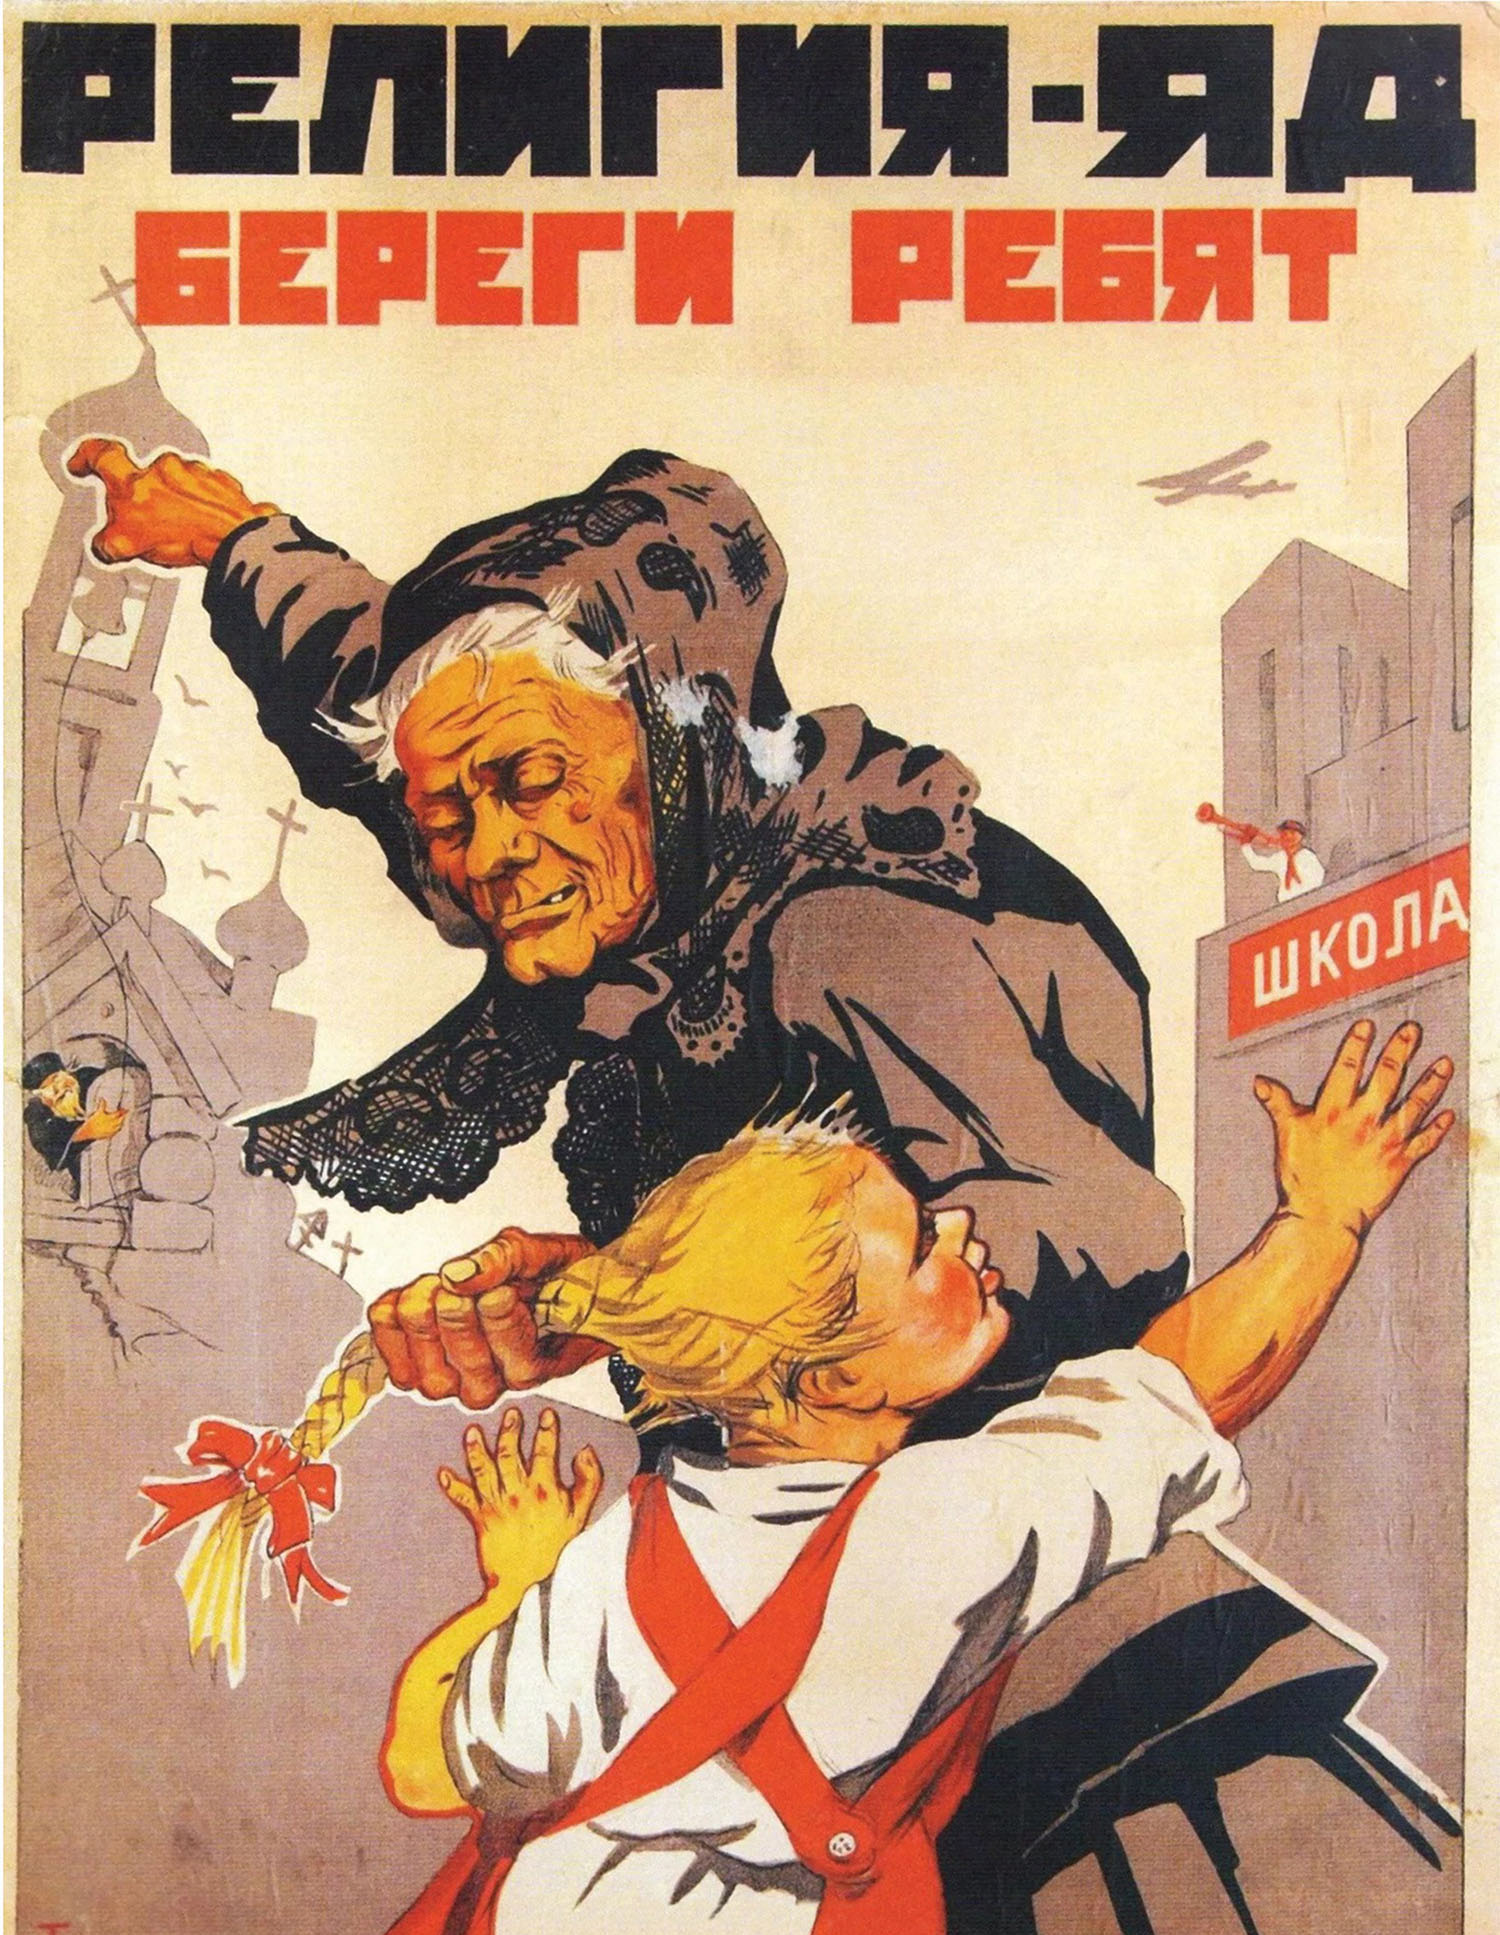 Soviet propaganda poster showing an old religious woman and a child